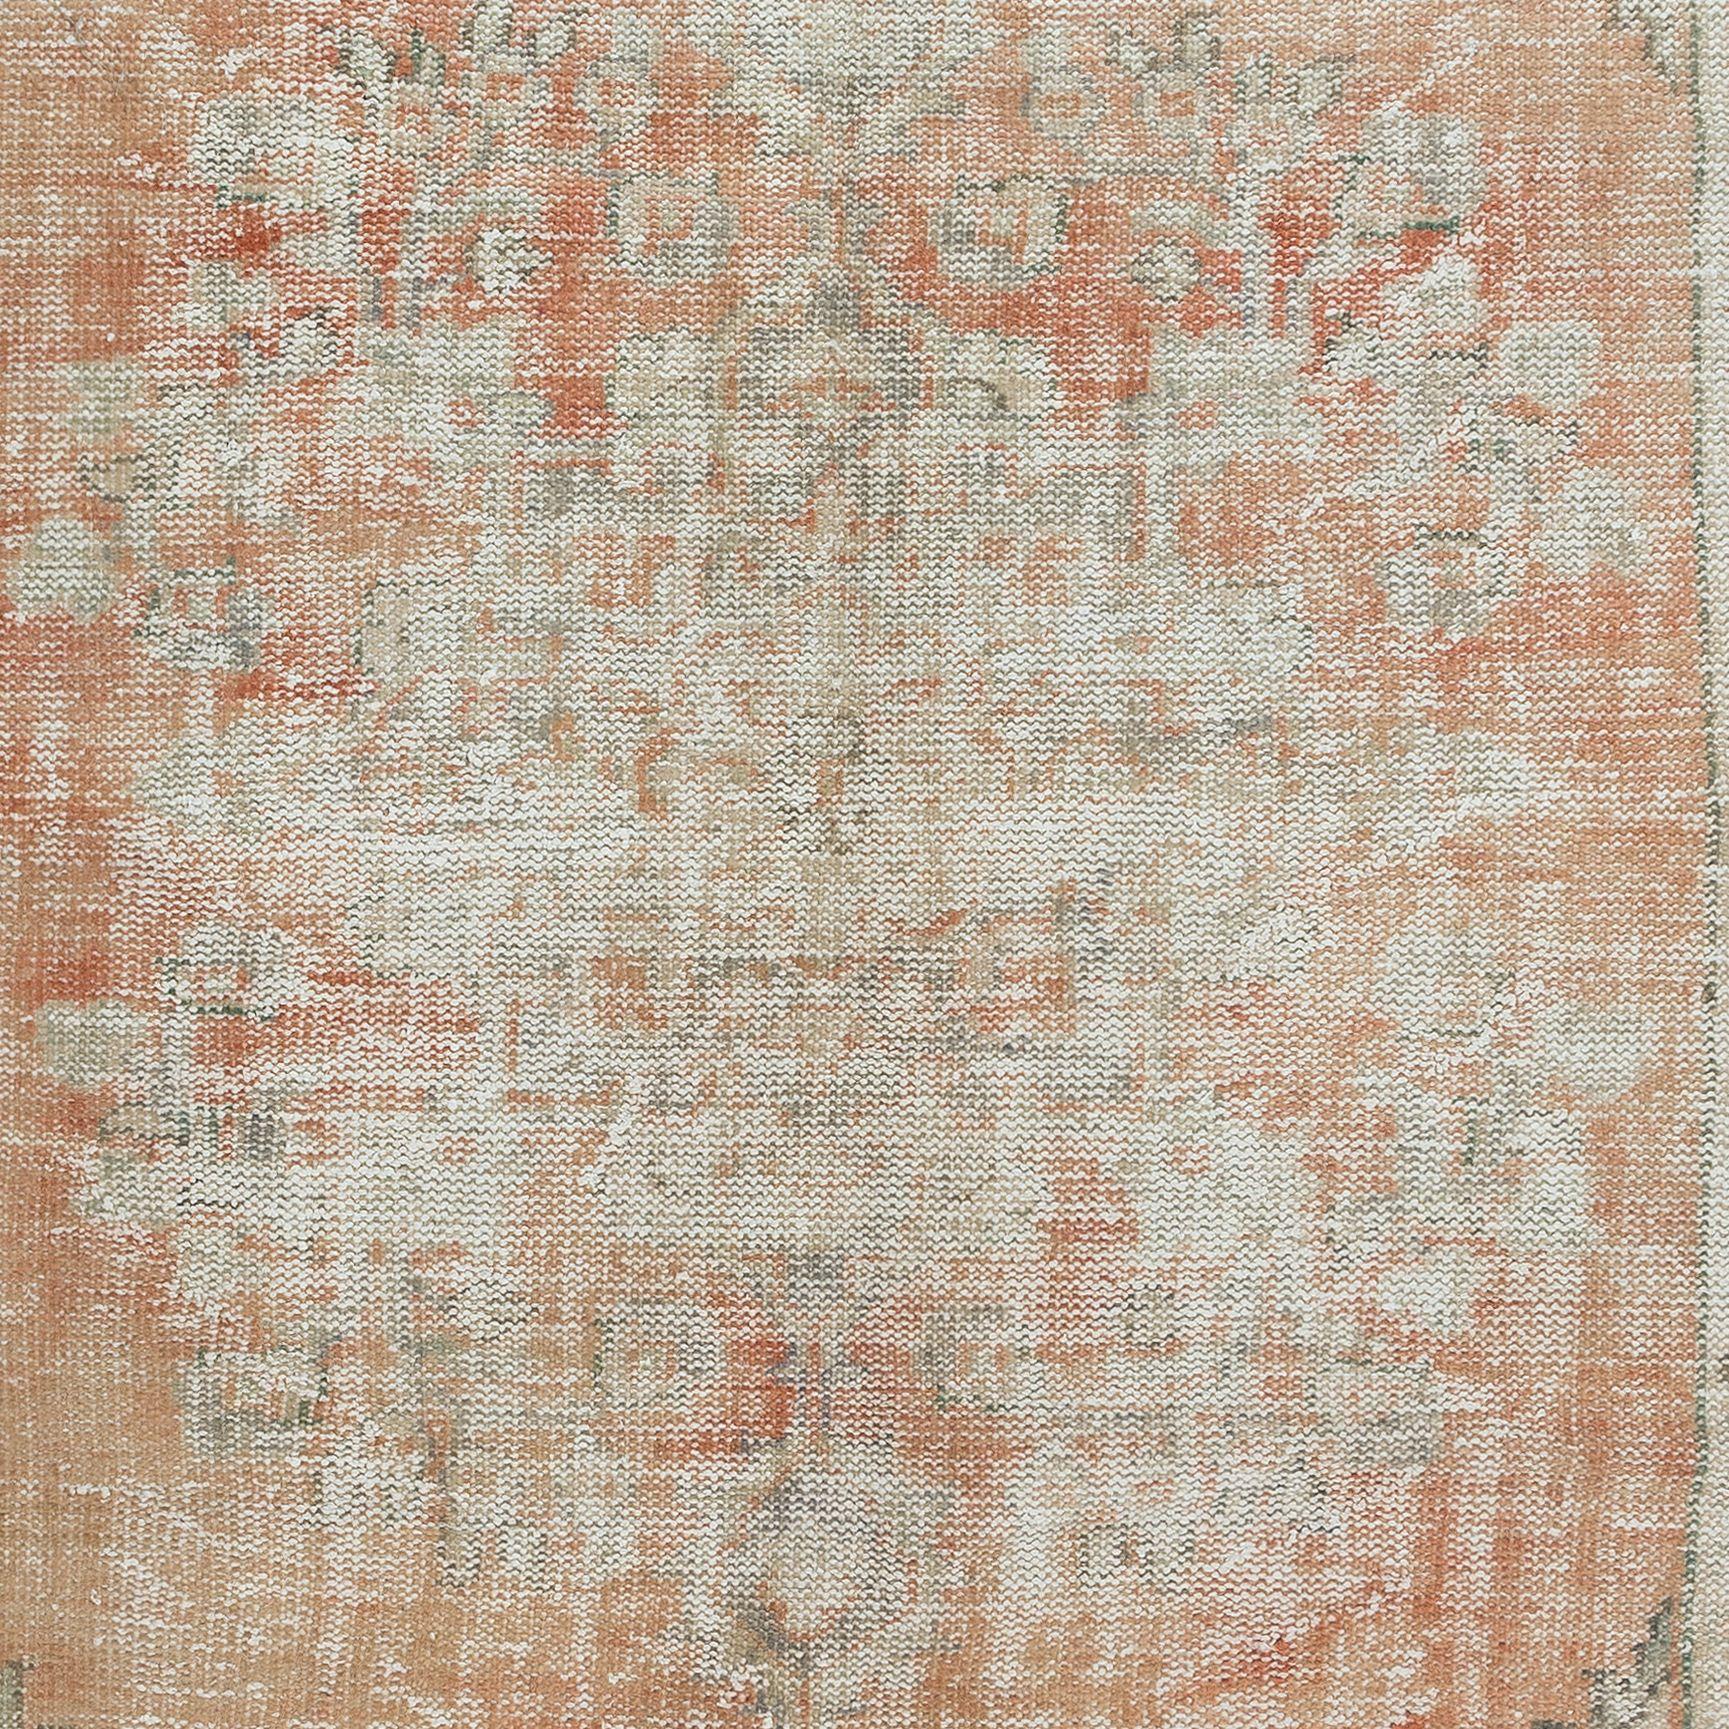 Turkish 5.2x8.7 Ft Hand Knotted Anatolian Rug, Mid-Century Shabby Chic Carpet For Sale